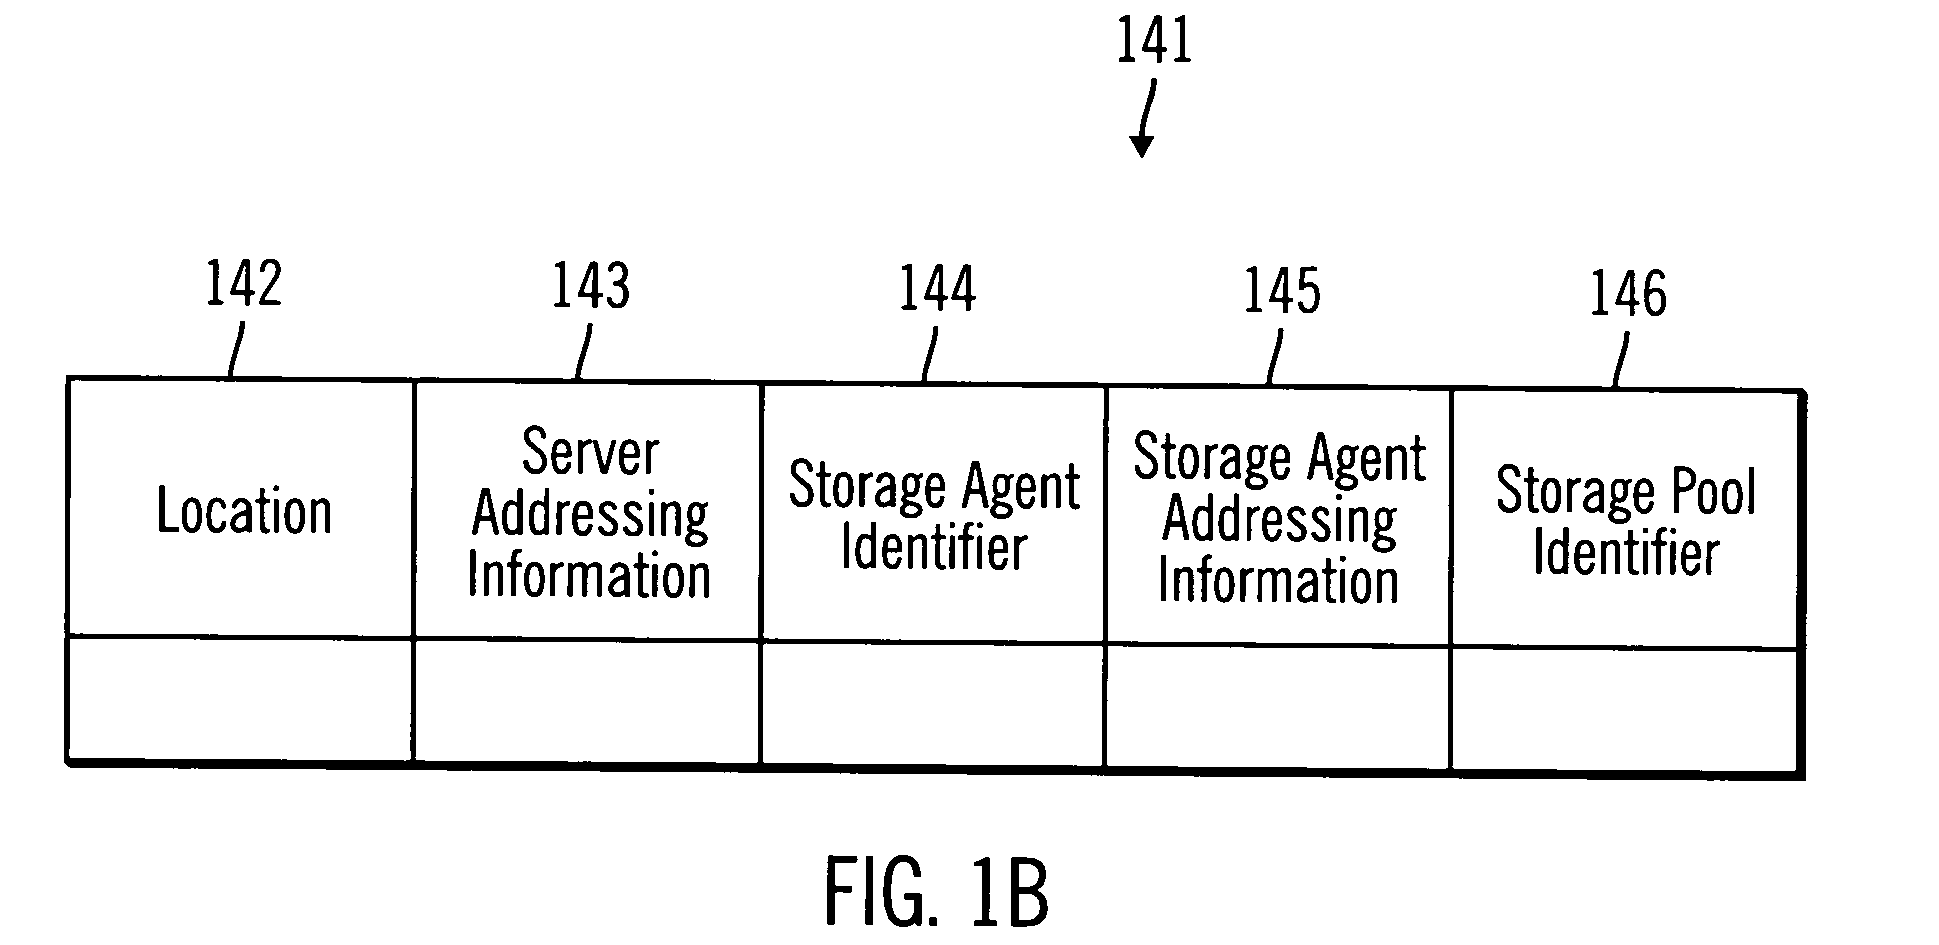 Storage pool space allocation across multiple locations